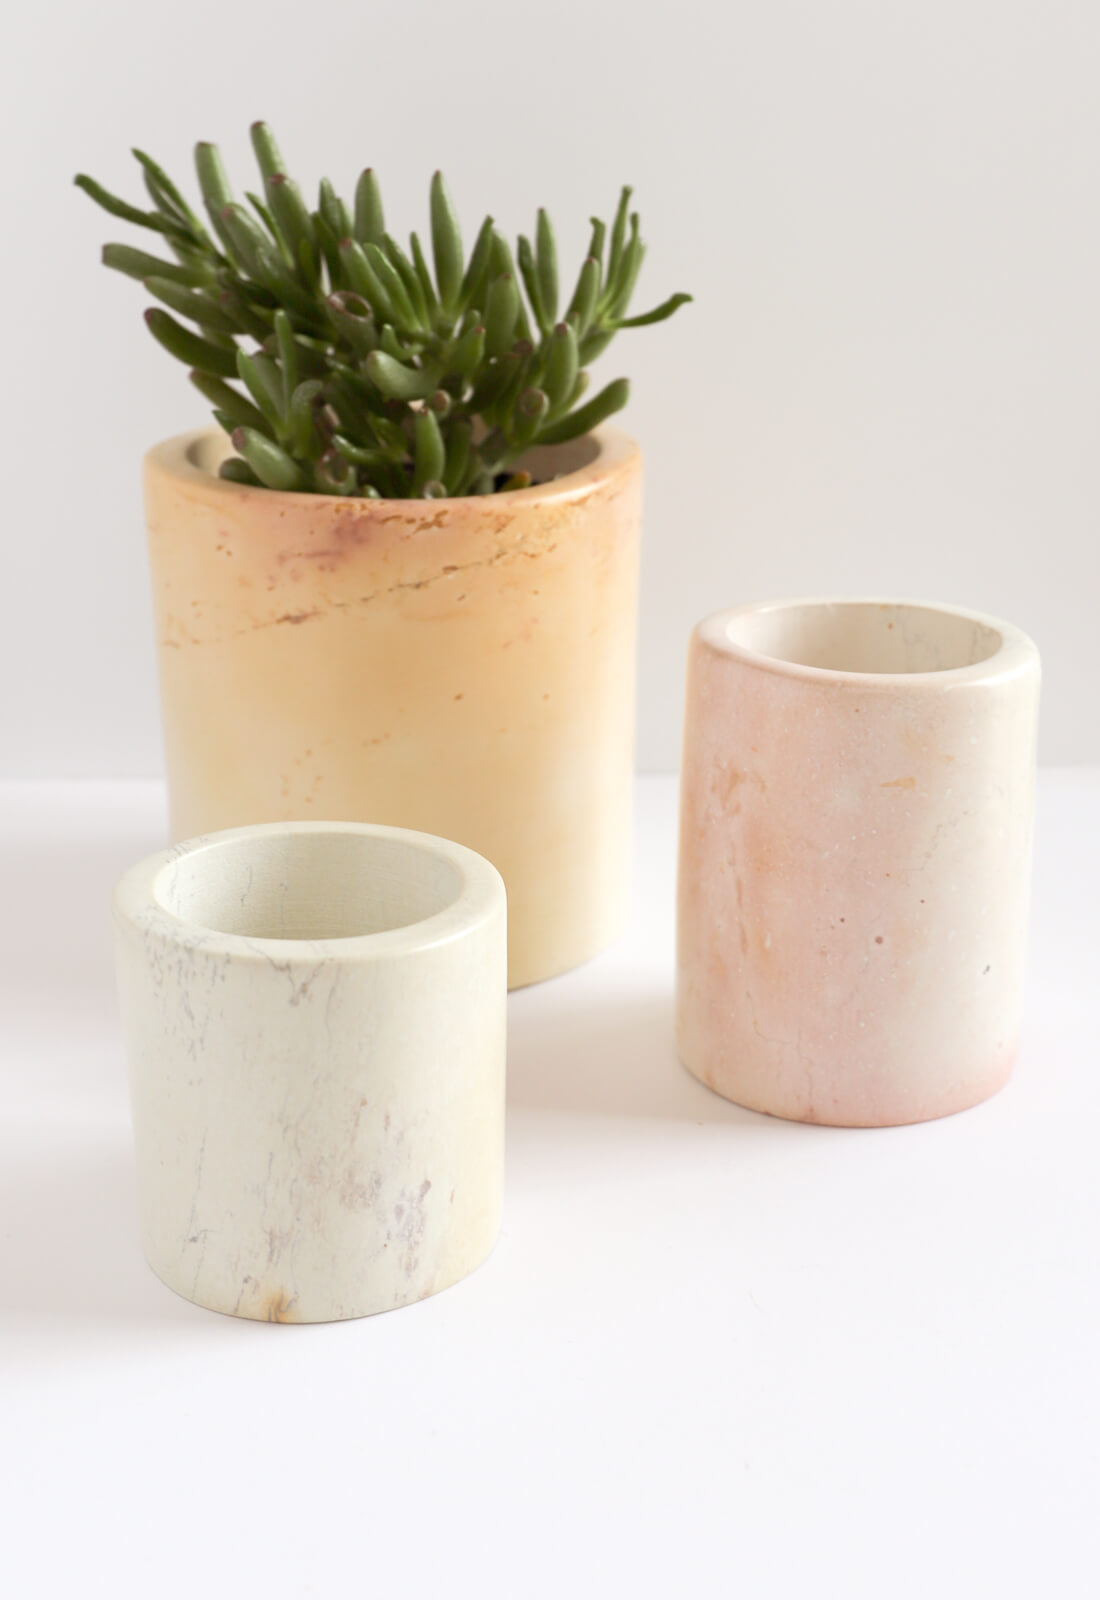 Soapstone Cylinder Planter - Small